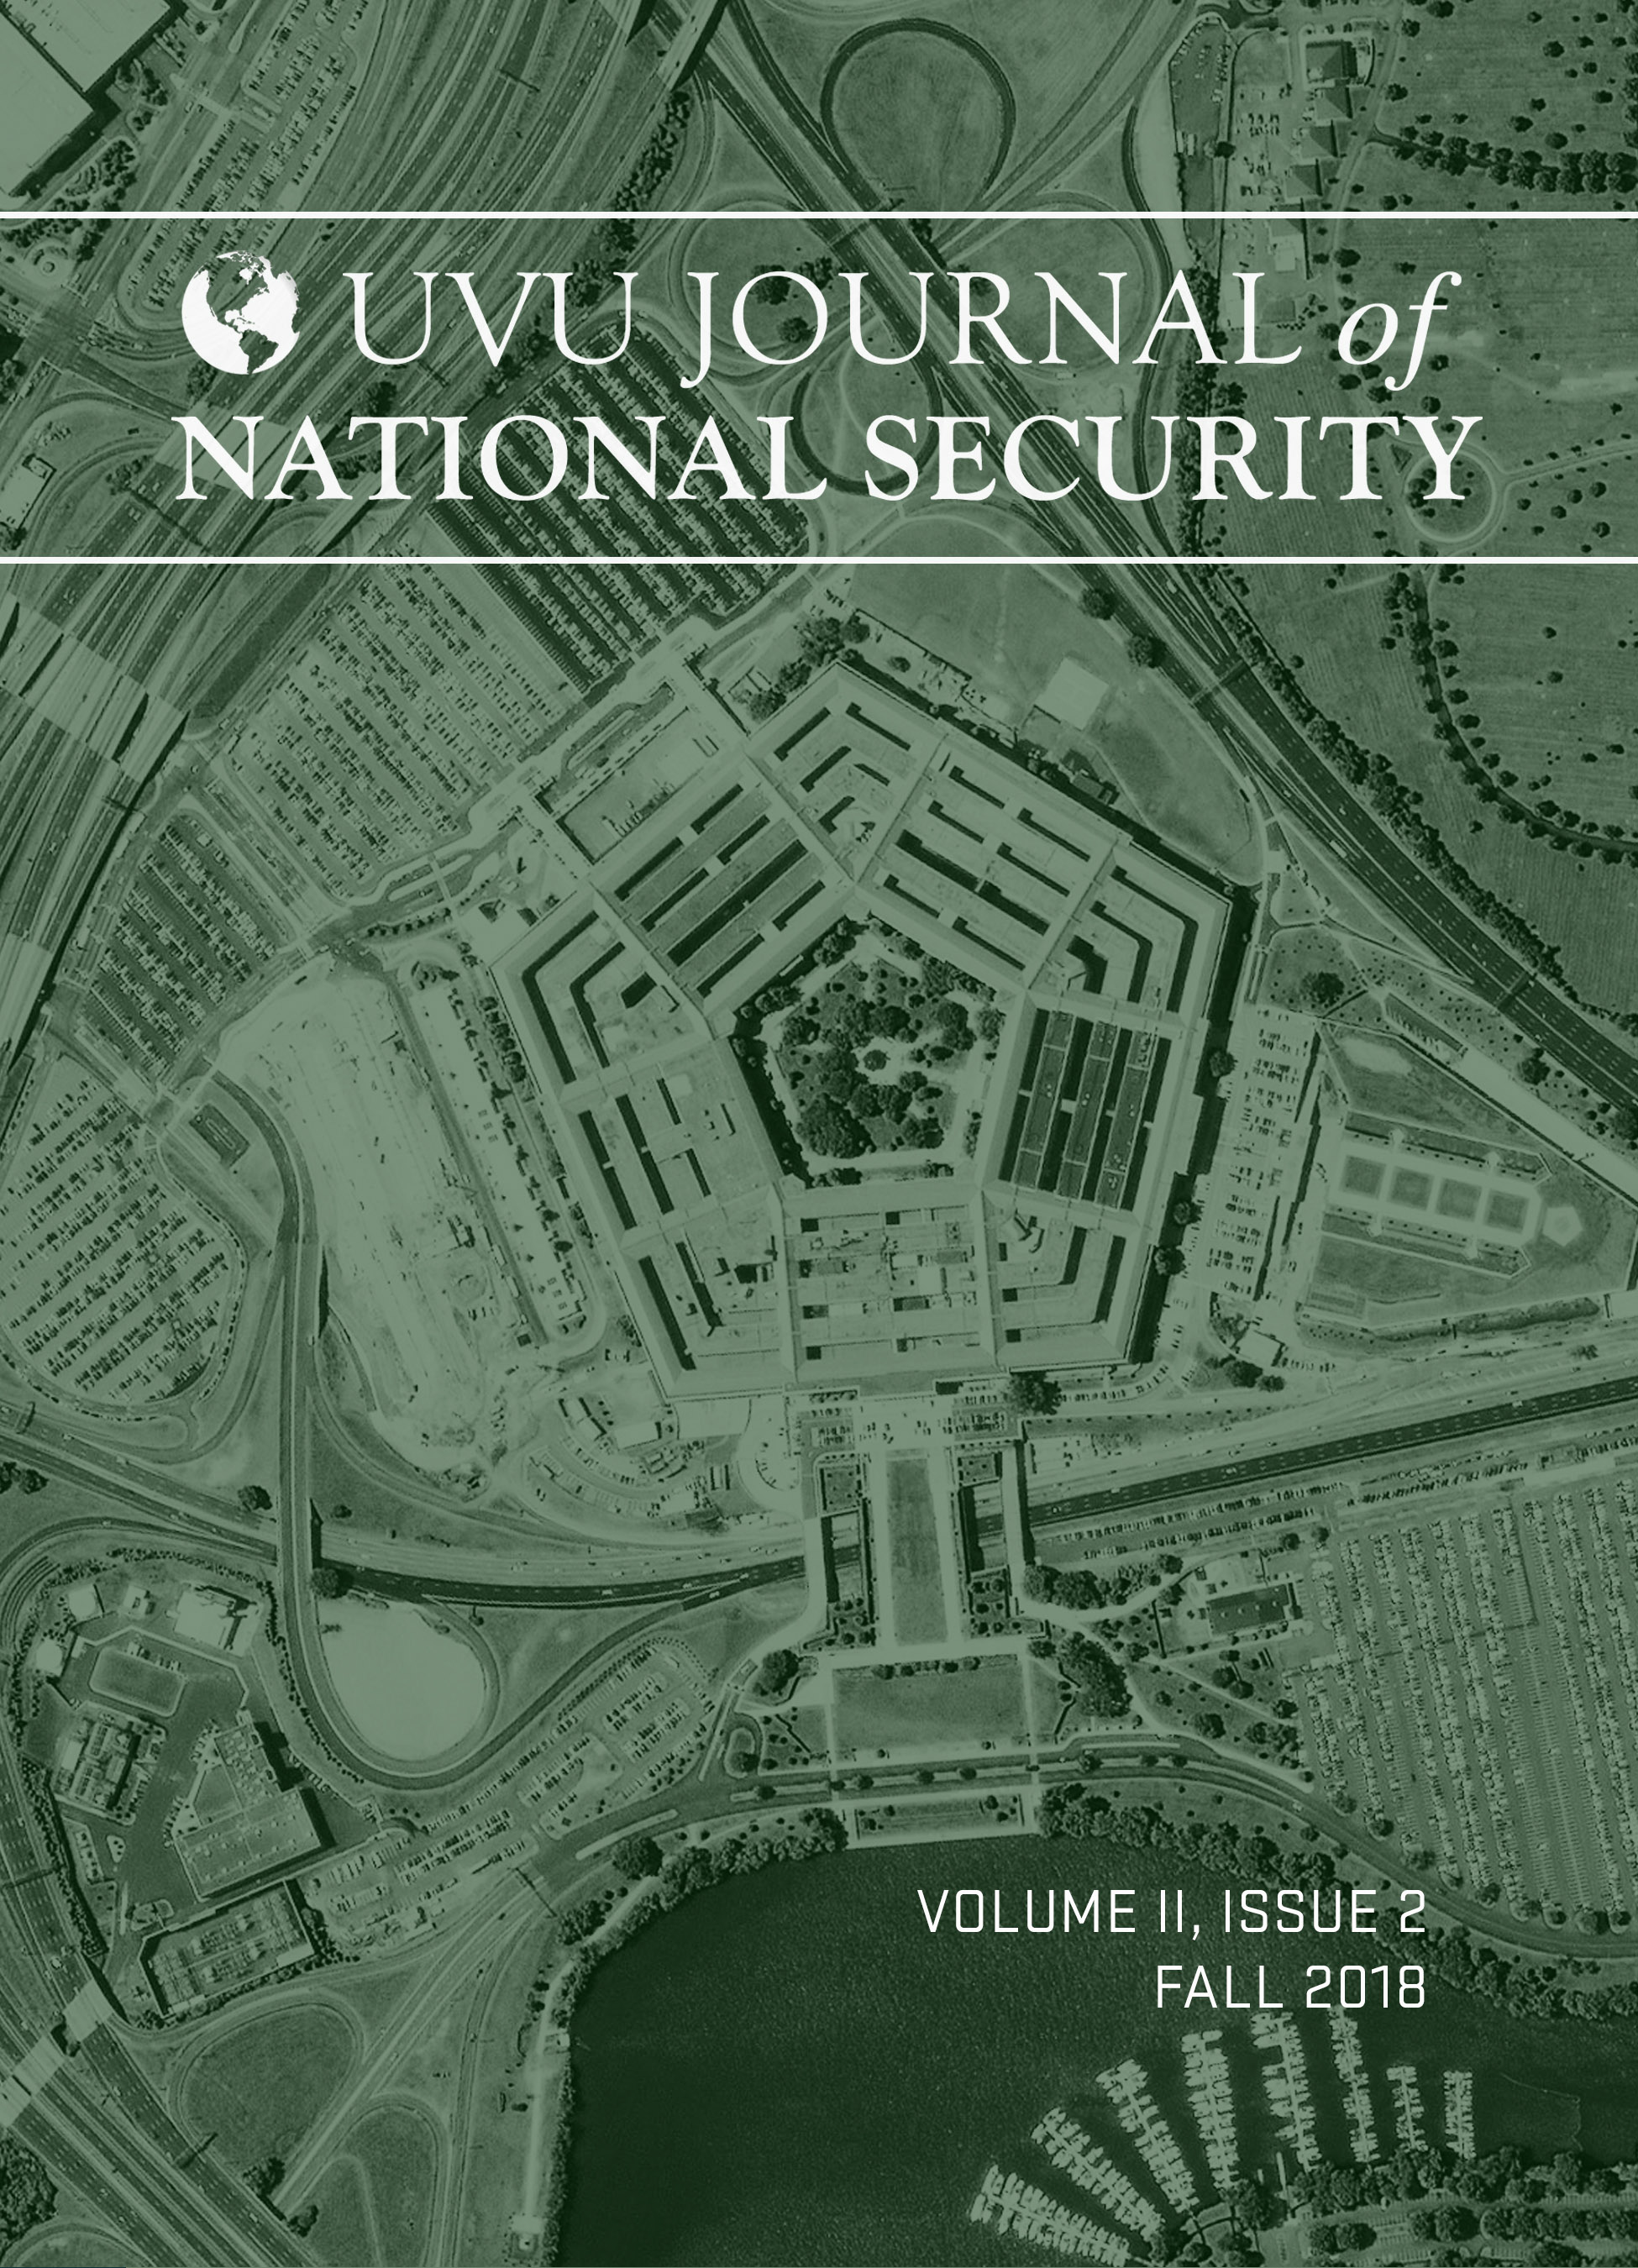 Read Volume 2, Issue 2 of The NS Journal